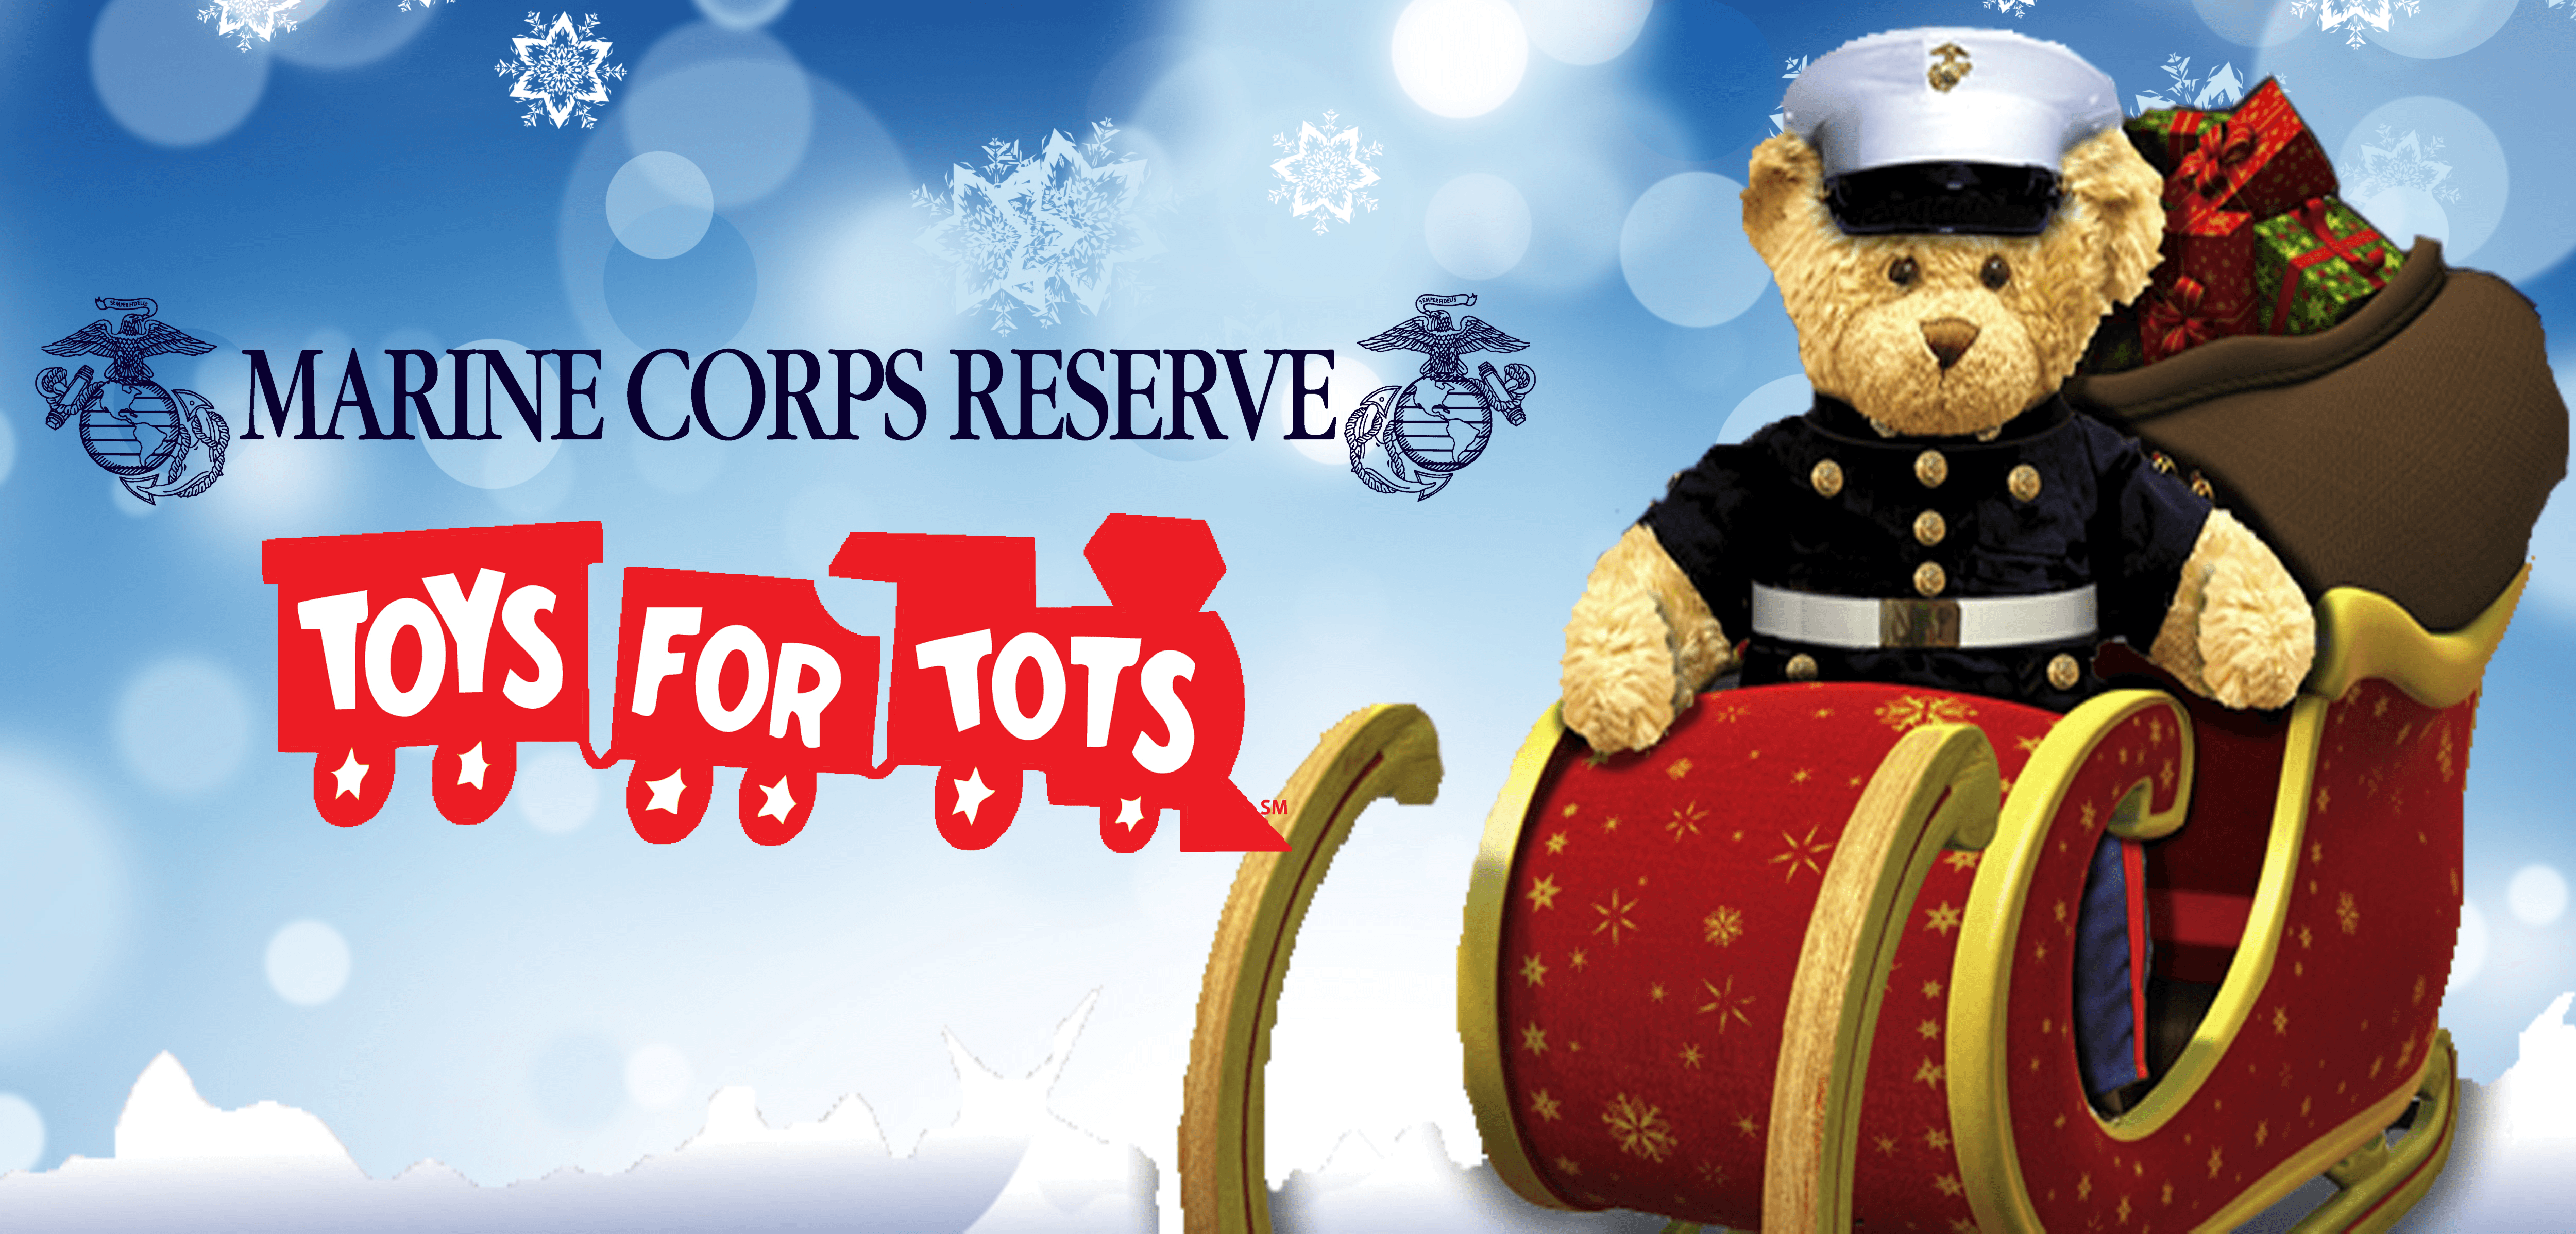 Black and White Toys for Tots Logo - Arby's Free Classic Sandwich with “Toys for Tots” Donation!